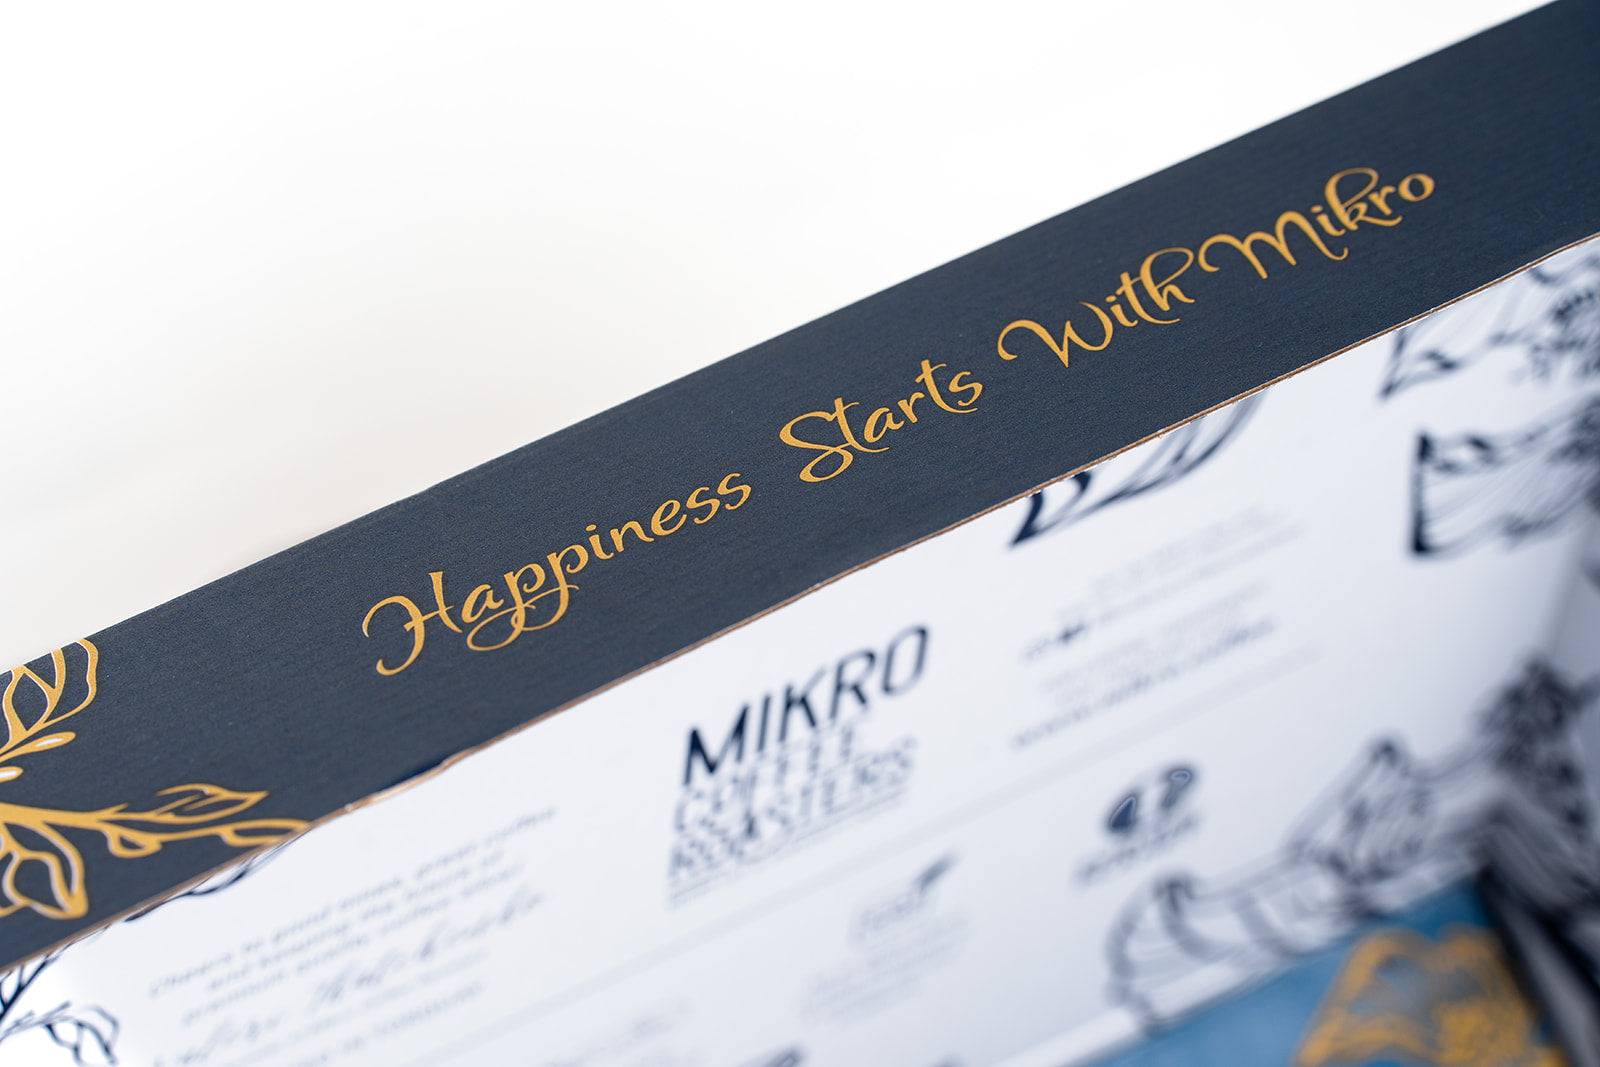 happiness starts with mikro coffee